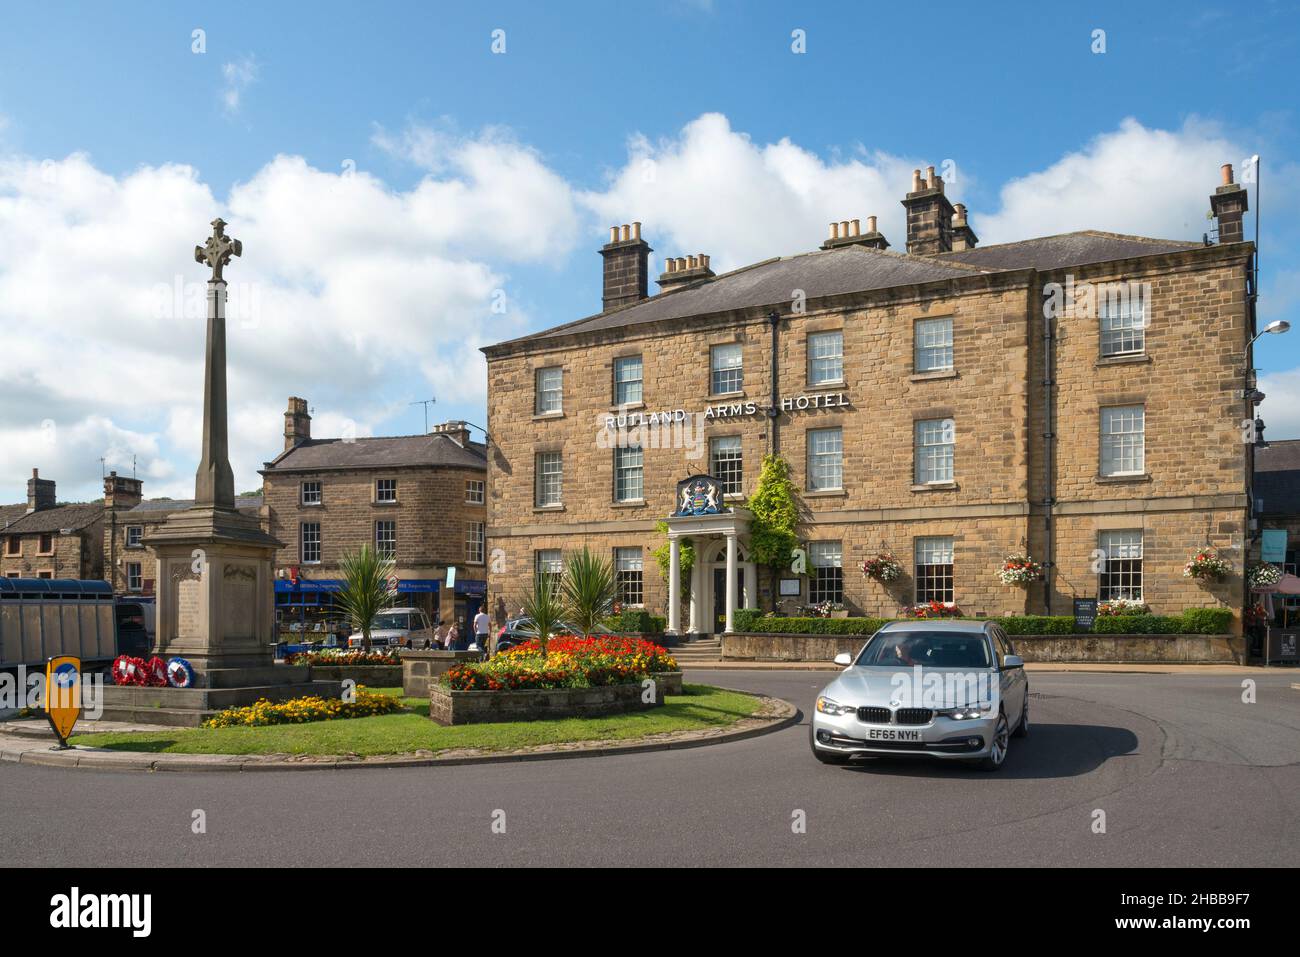 Rutland Arms Hotel, Bakewell, Derbyshire Banque D'Images